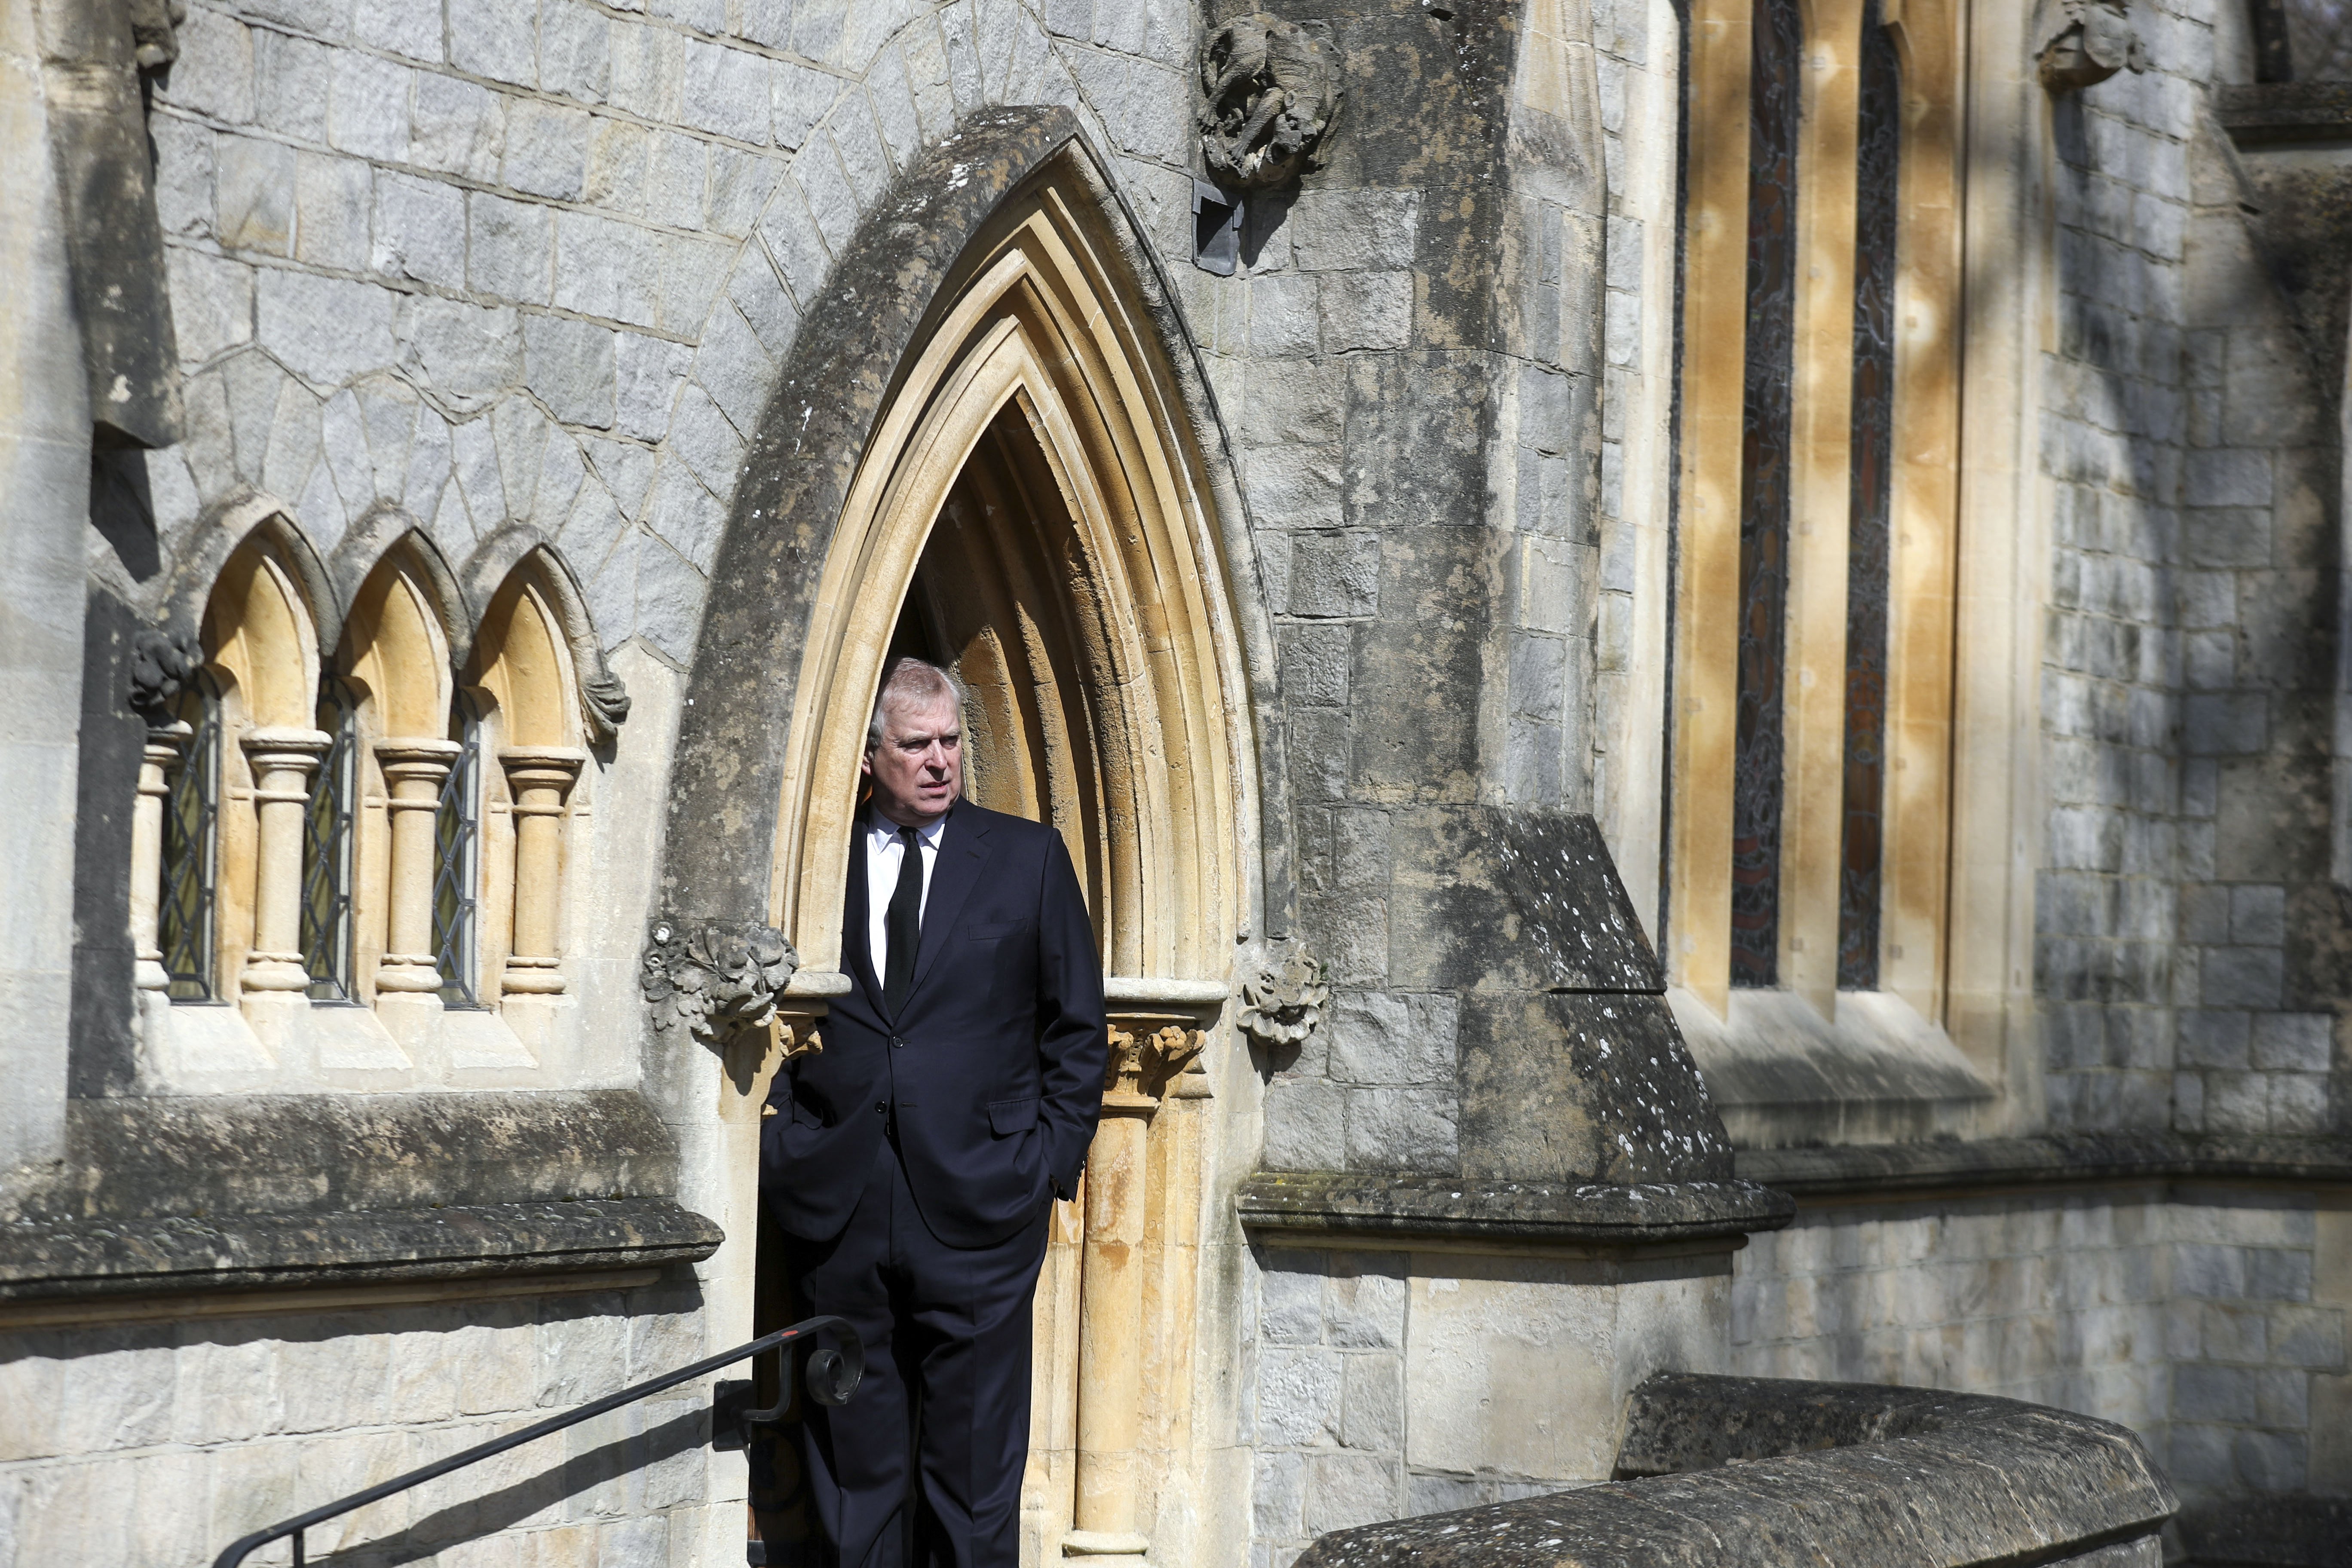 Prince Andrew, Duke of York, attends Sunday service at the Royal Chapel of All Saints, at Royal Lodge on April 11, 2021 in Windsor, England | Source: Getty Images